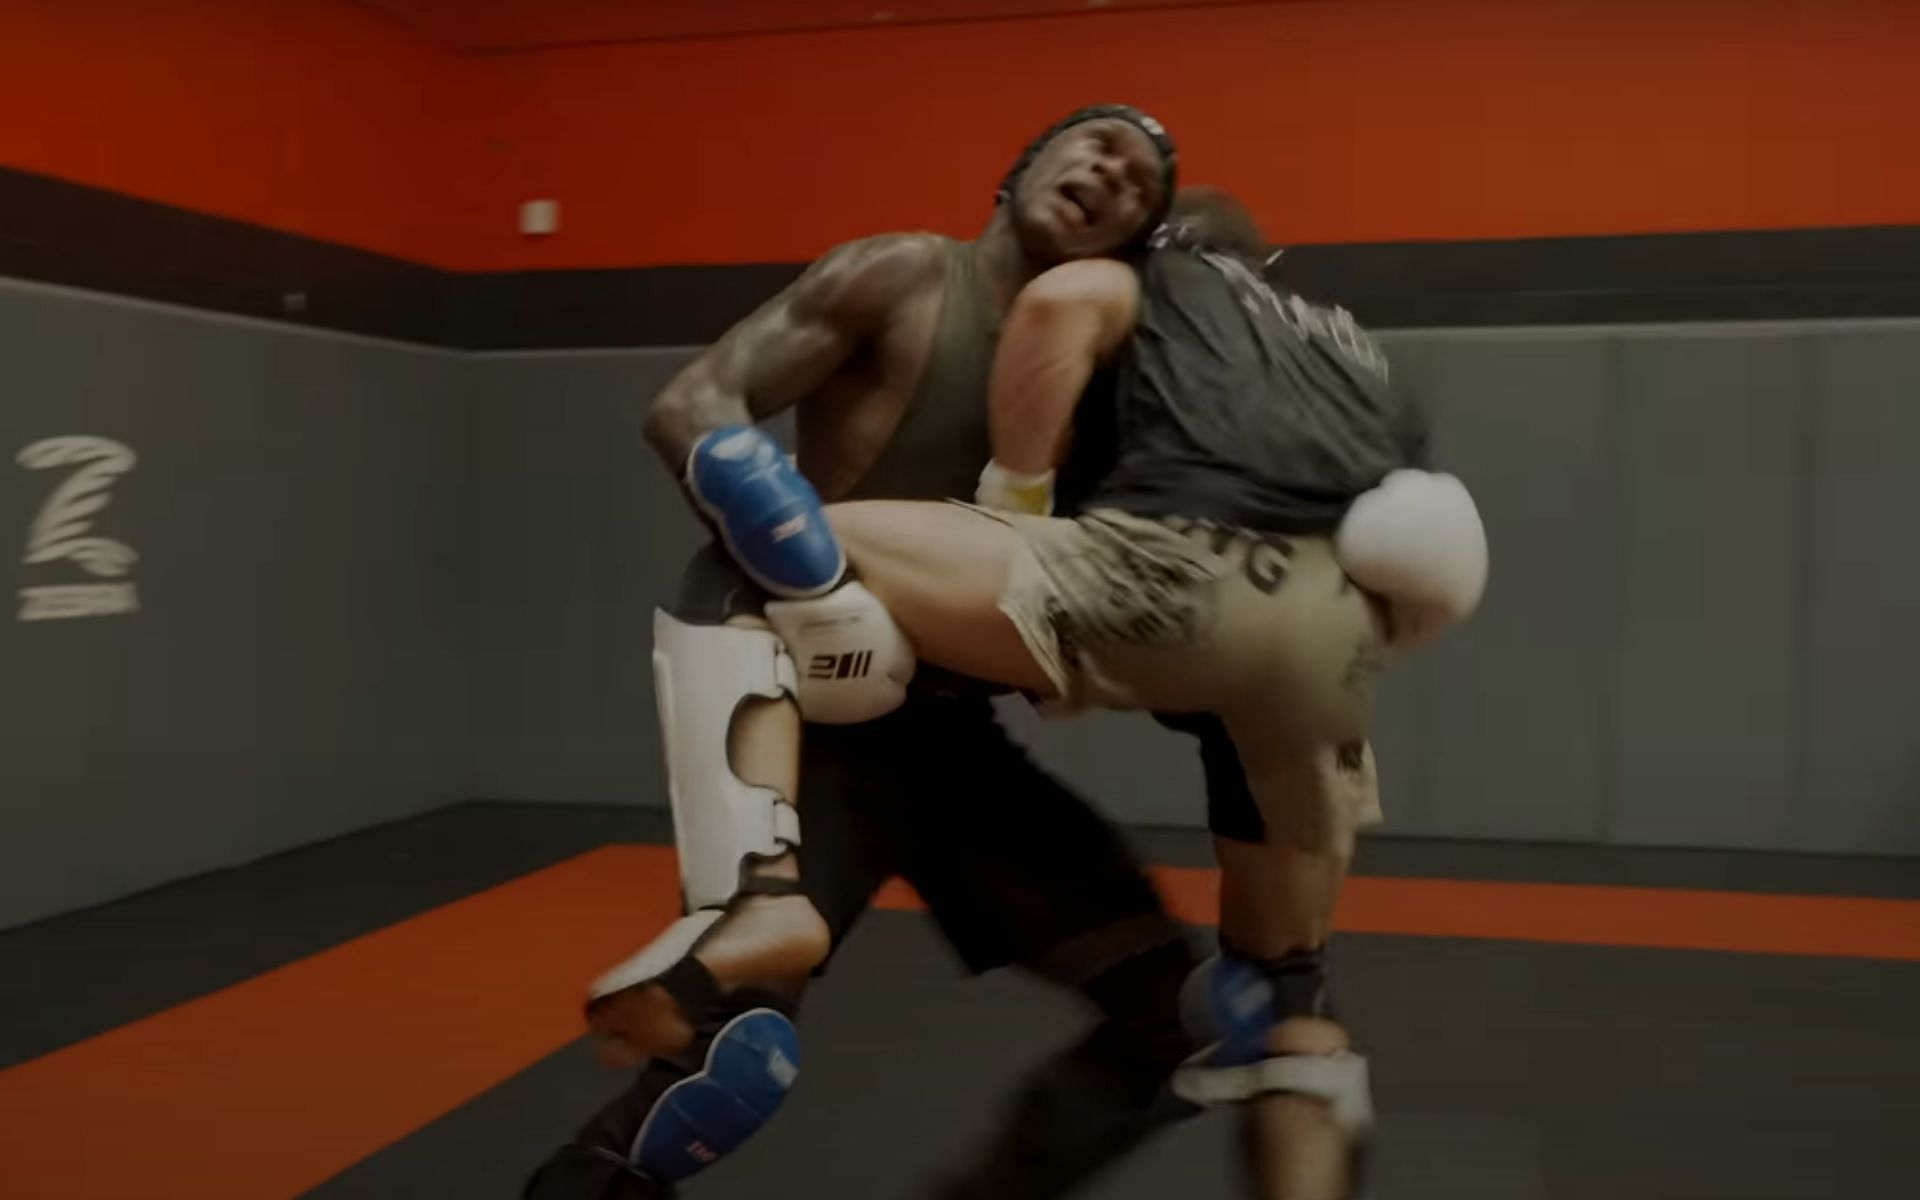 Israel Adesanya trains for his rematch with Alex Pereira [Image Credit: http://youtube.com/@FreeStylebender]